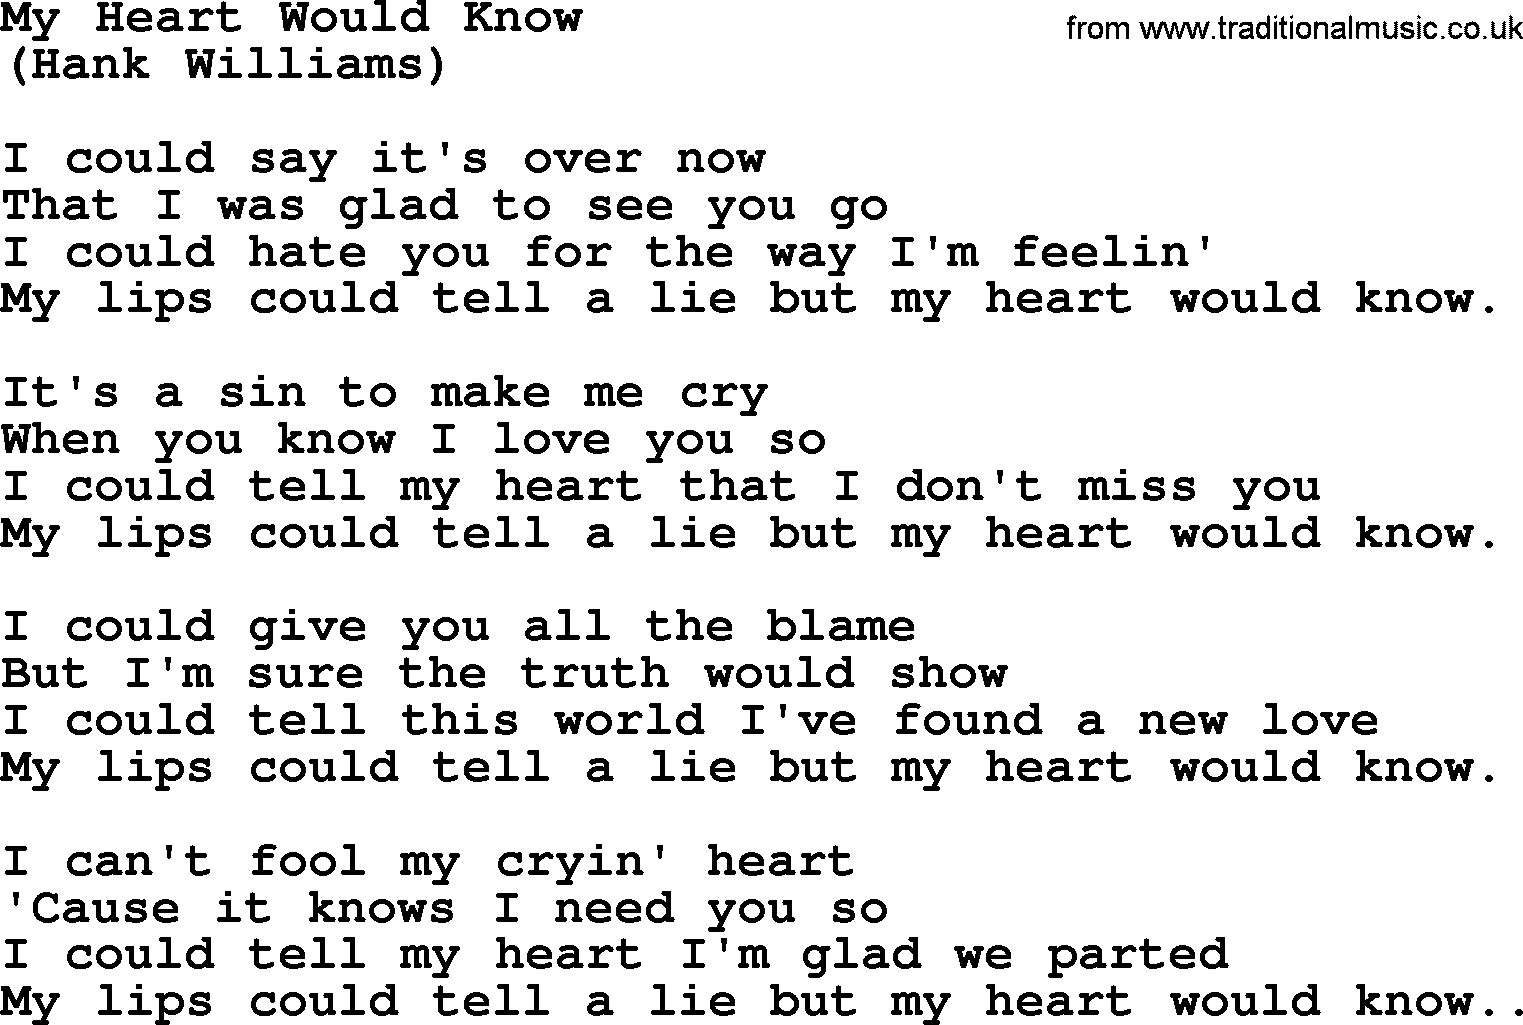 Hank Williams song My Heart Would Know, lyrics